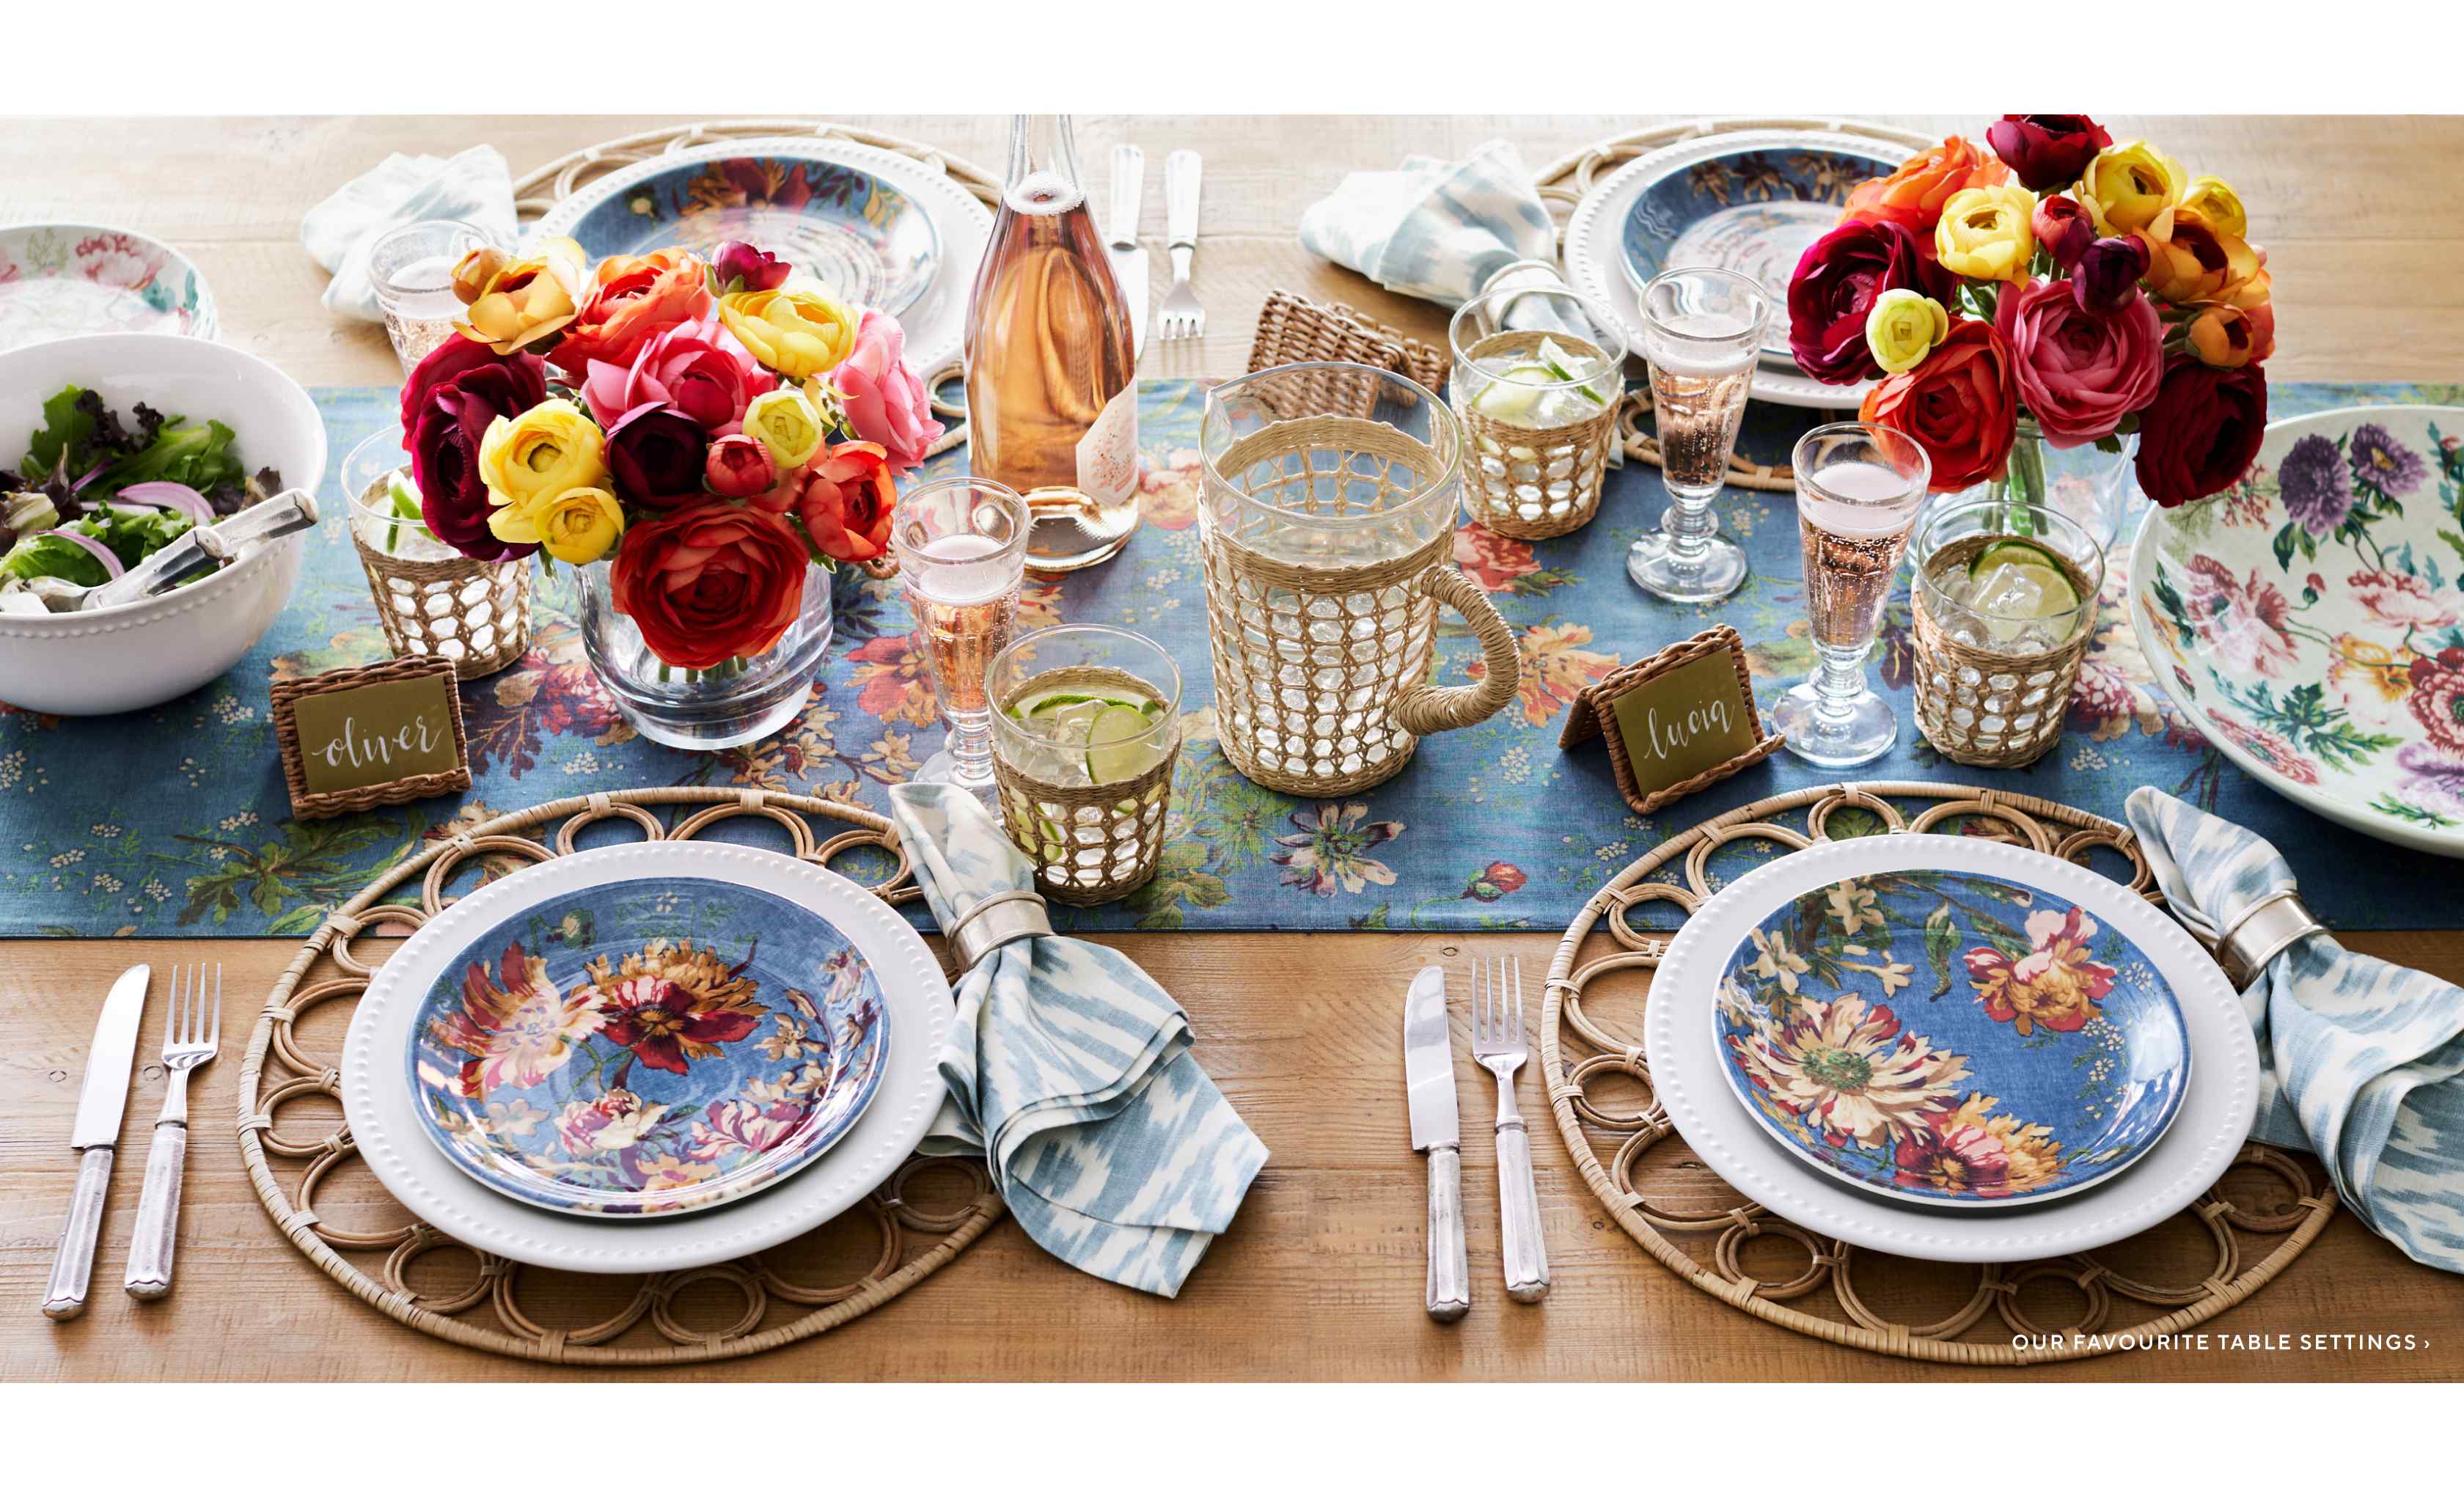 Our Favourite Table Settings